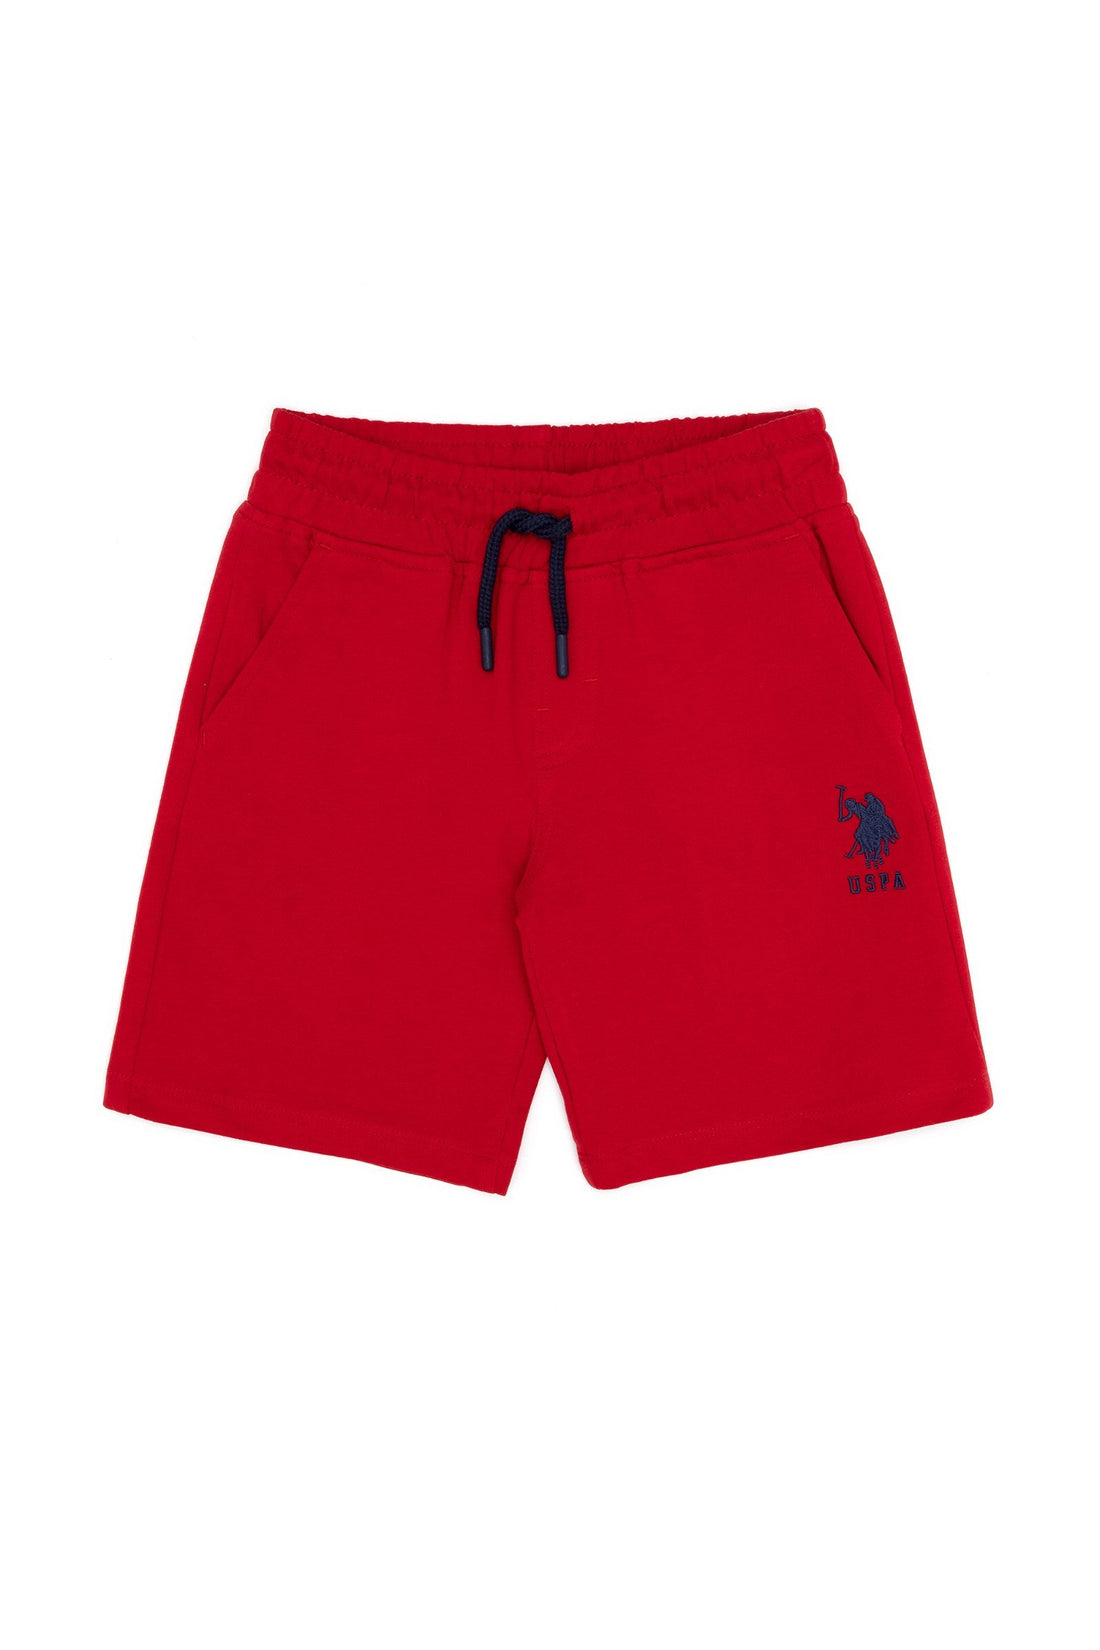 Red Knitted Shorts With Black Drawstrings